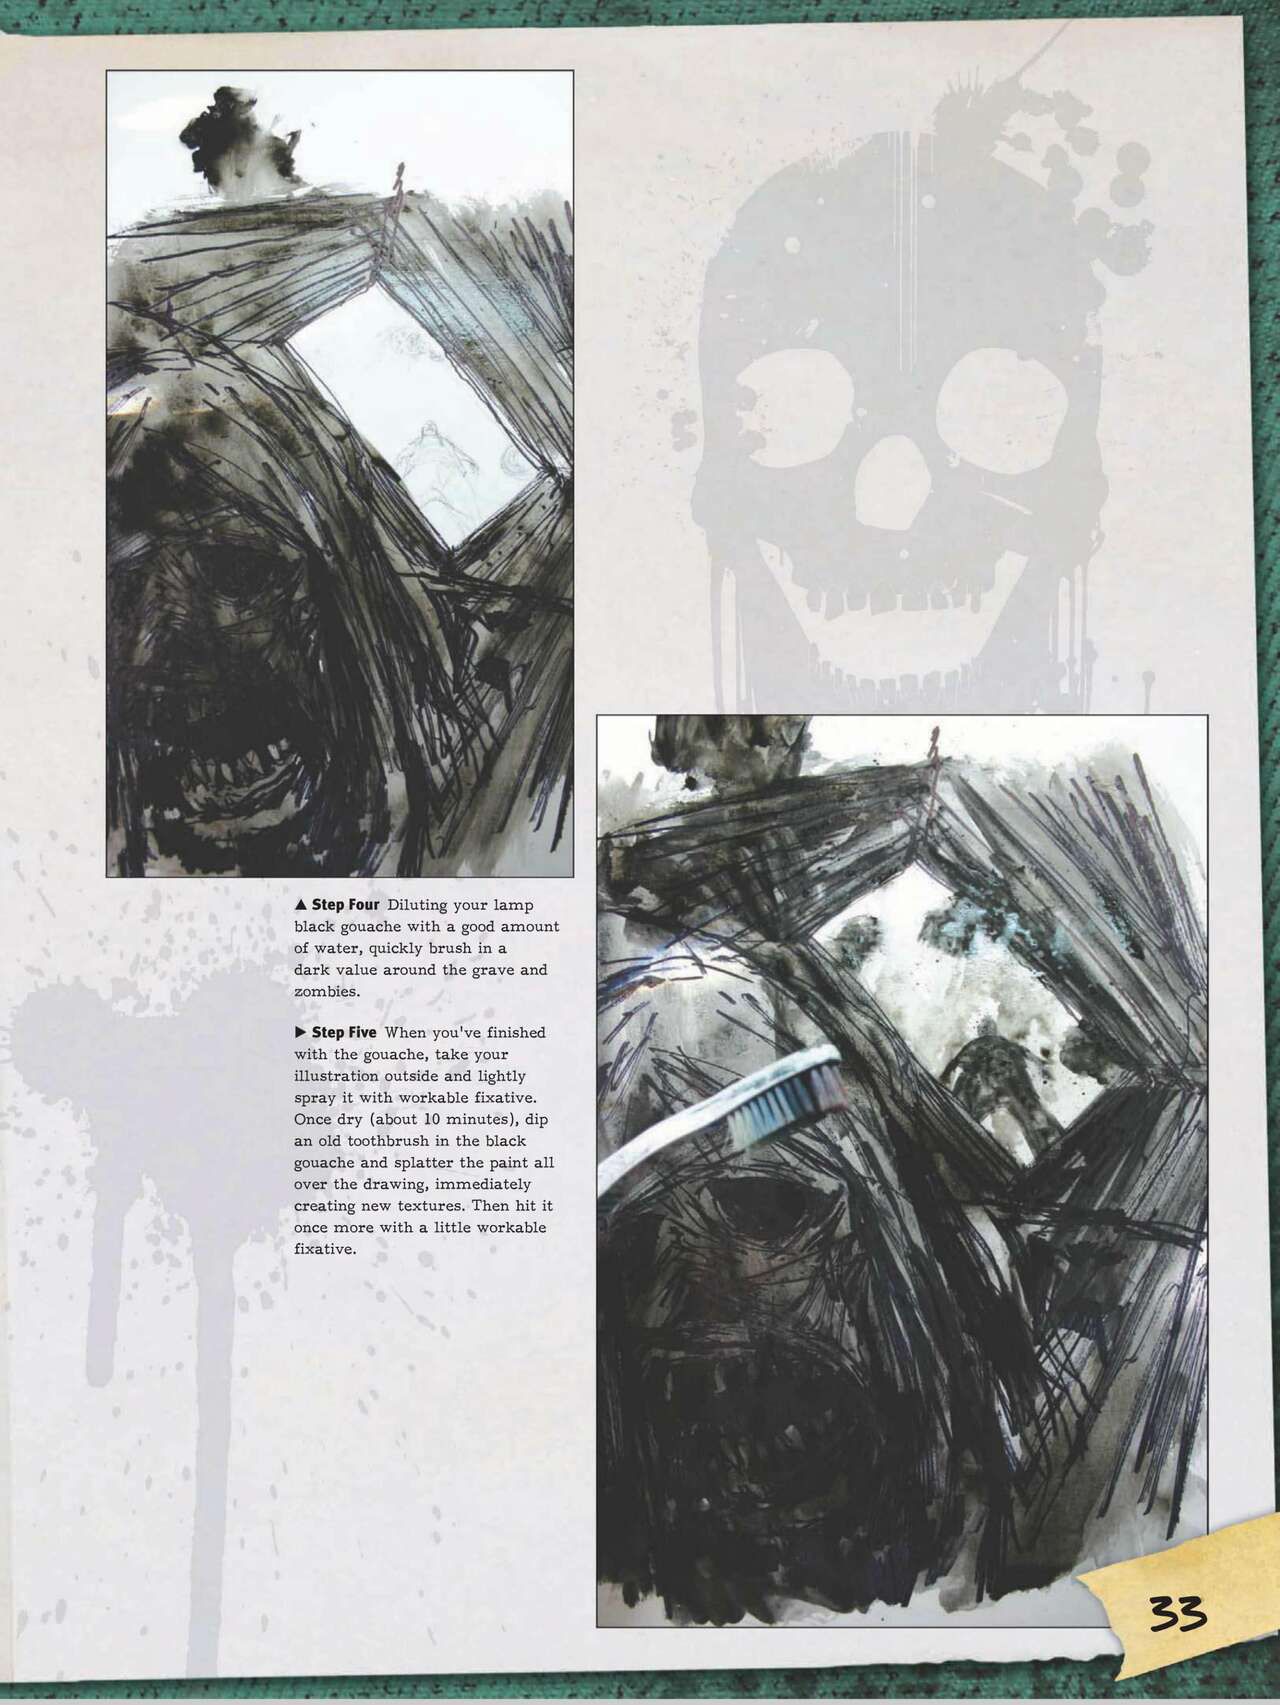 How to Draw Zombies: Discover the secrets to drawing, painting, and illustrating the undead 僵尸描绘集 34